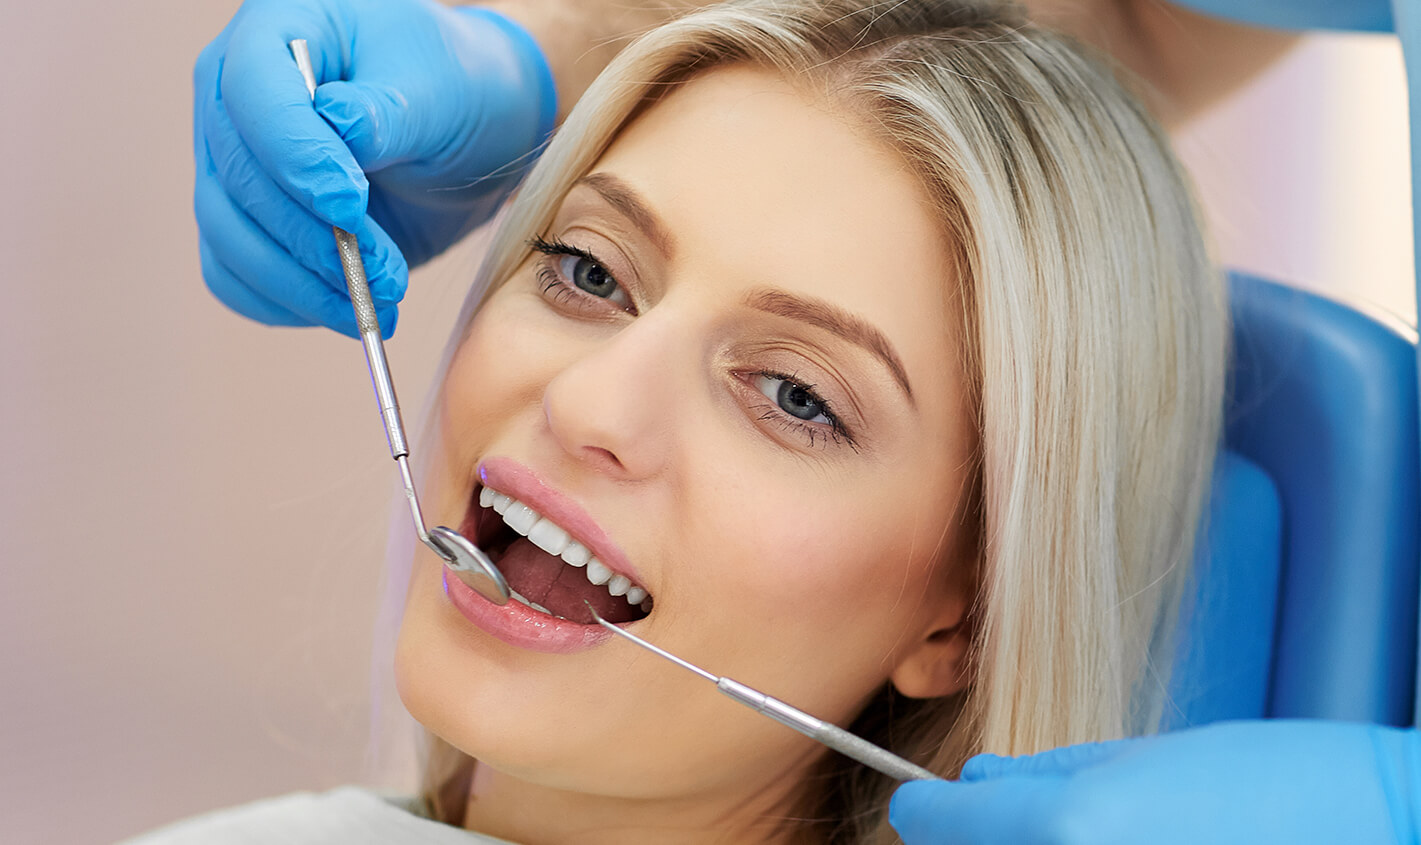 Root Canal Treatment Cost in Tucson AZ Area